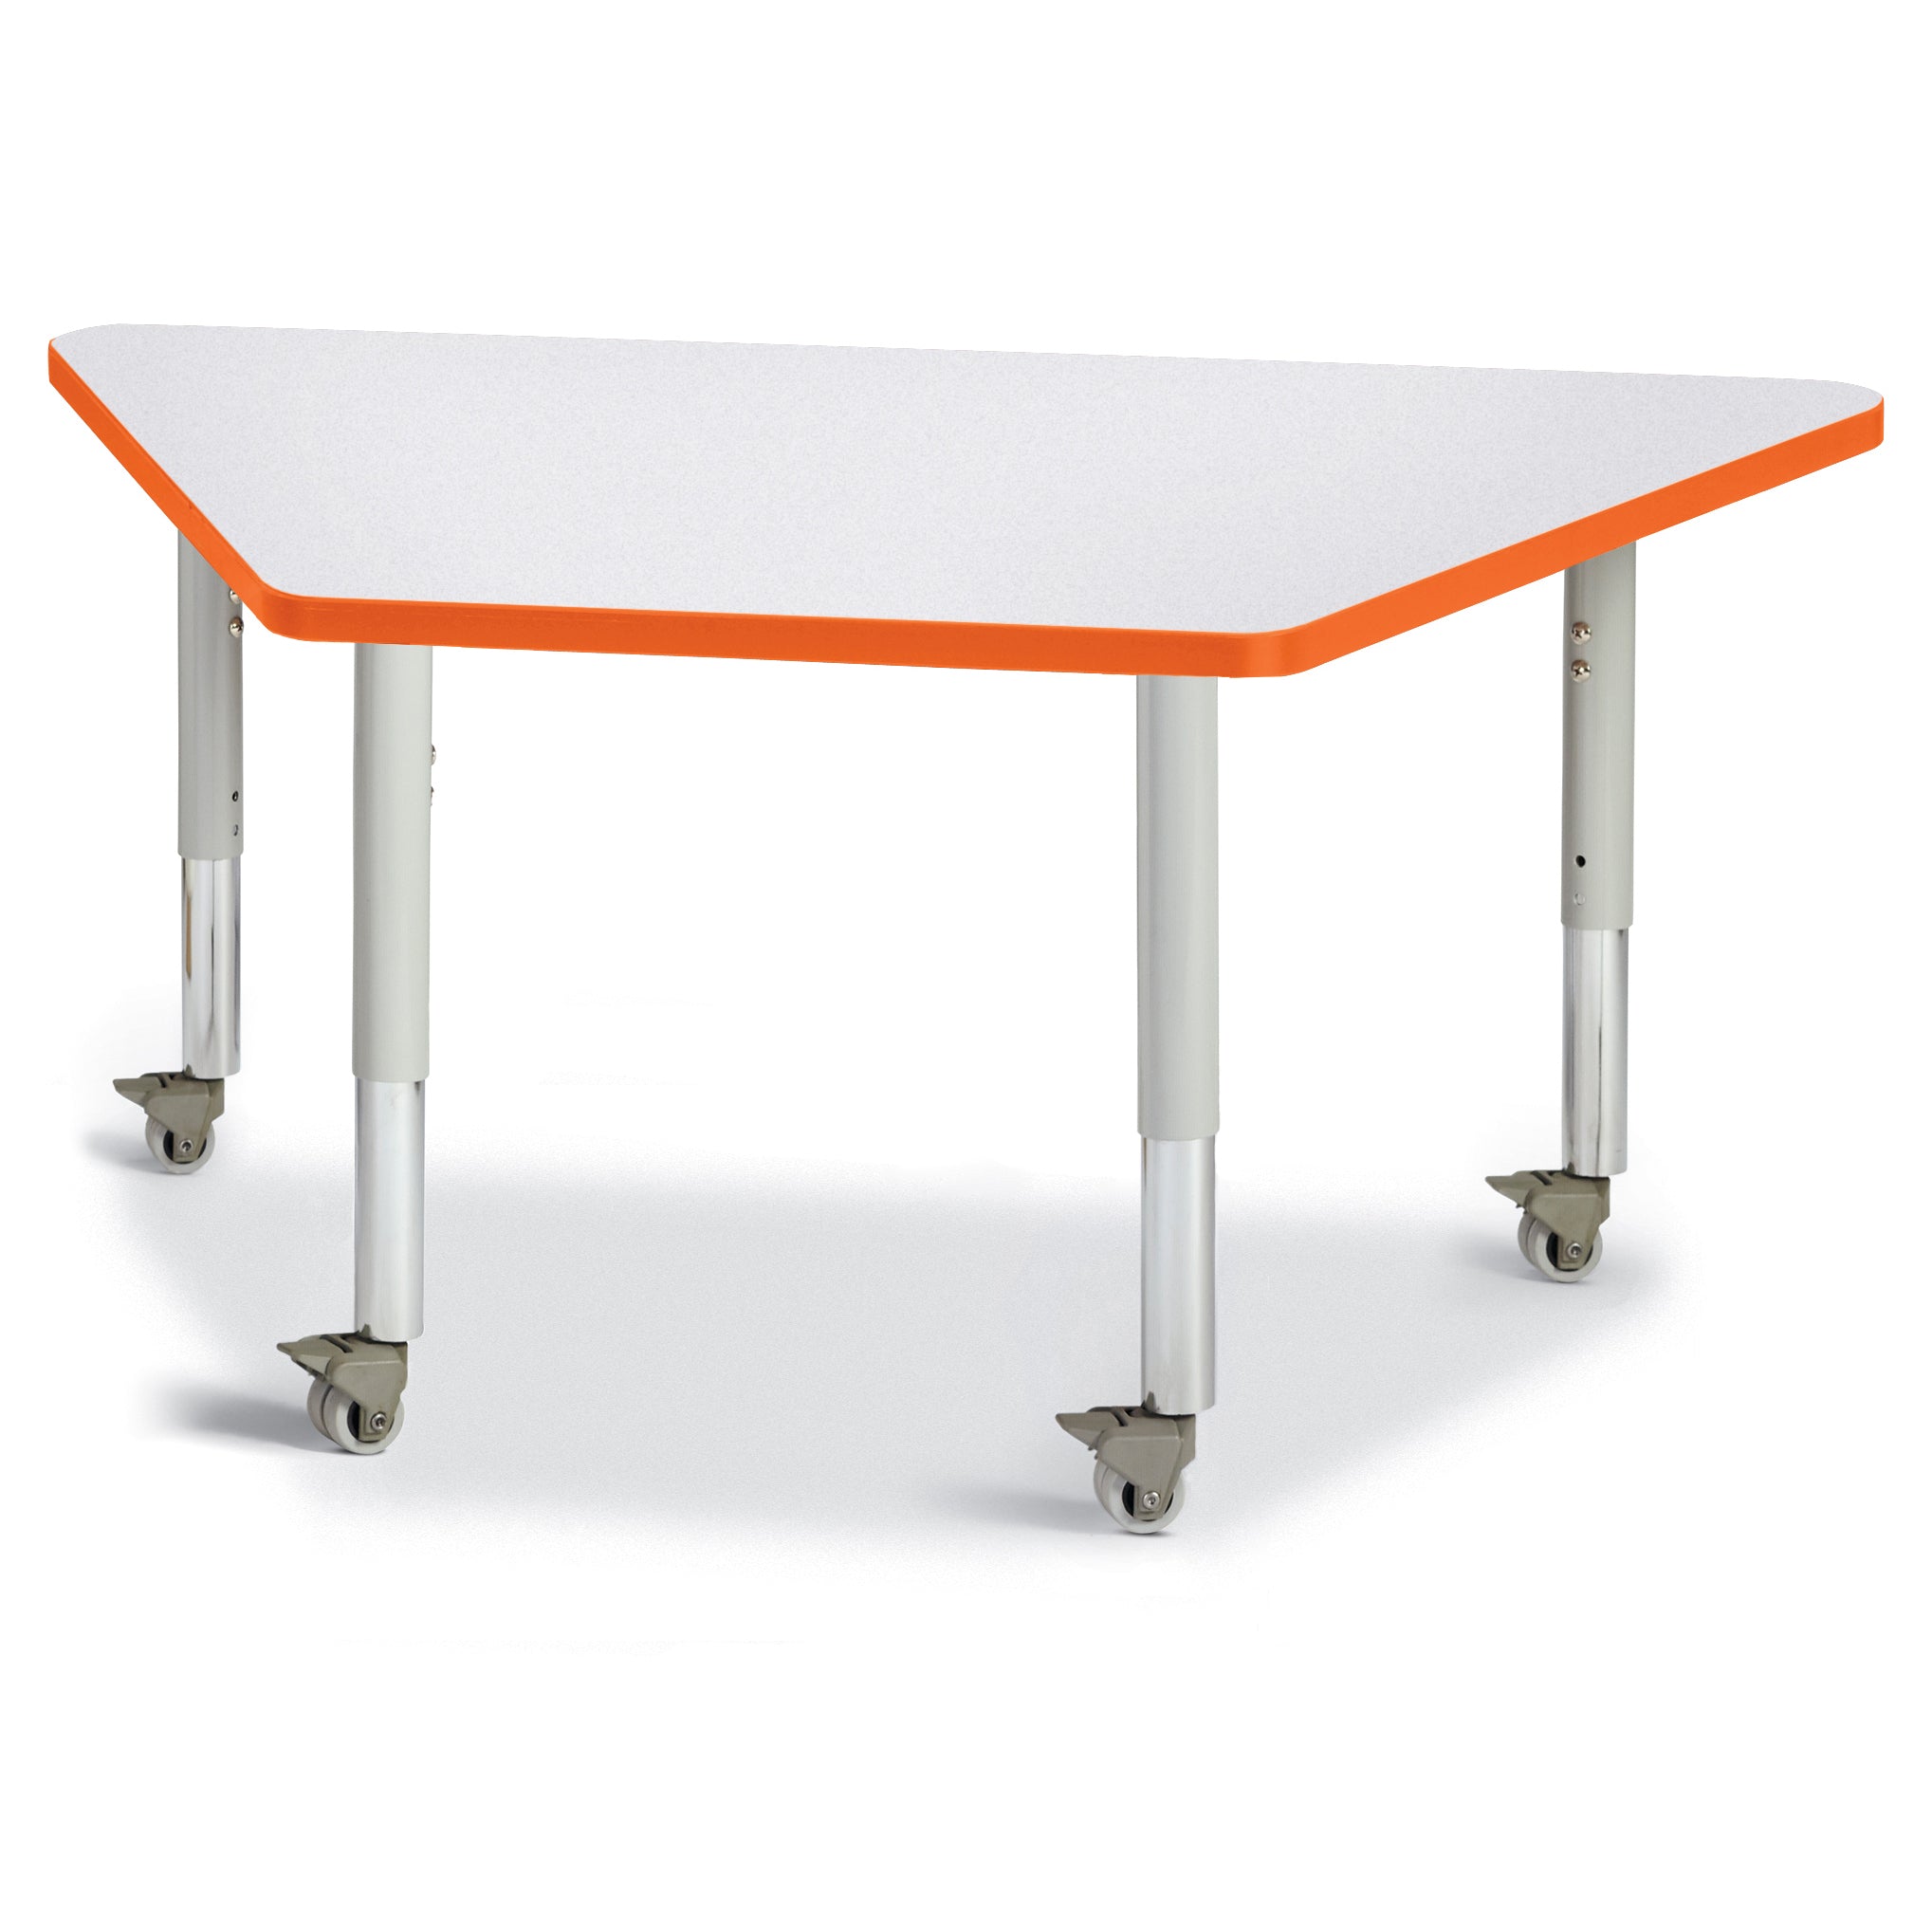 6438JCM114, Berries Trapezoid Activity Tables - 24" X 48", Mobile - Freckled Gray/Orange/Gray